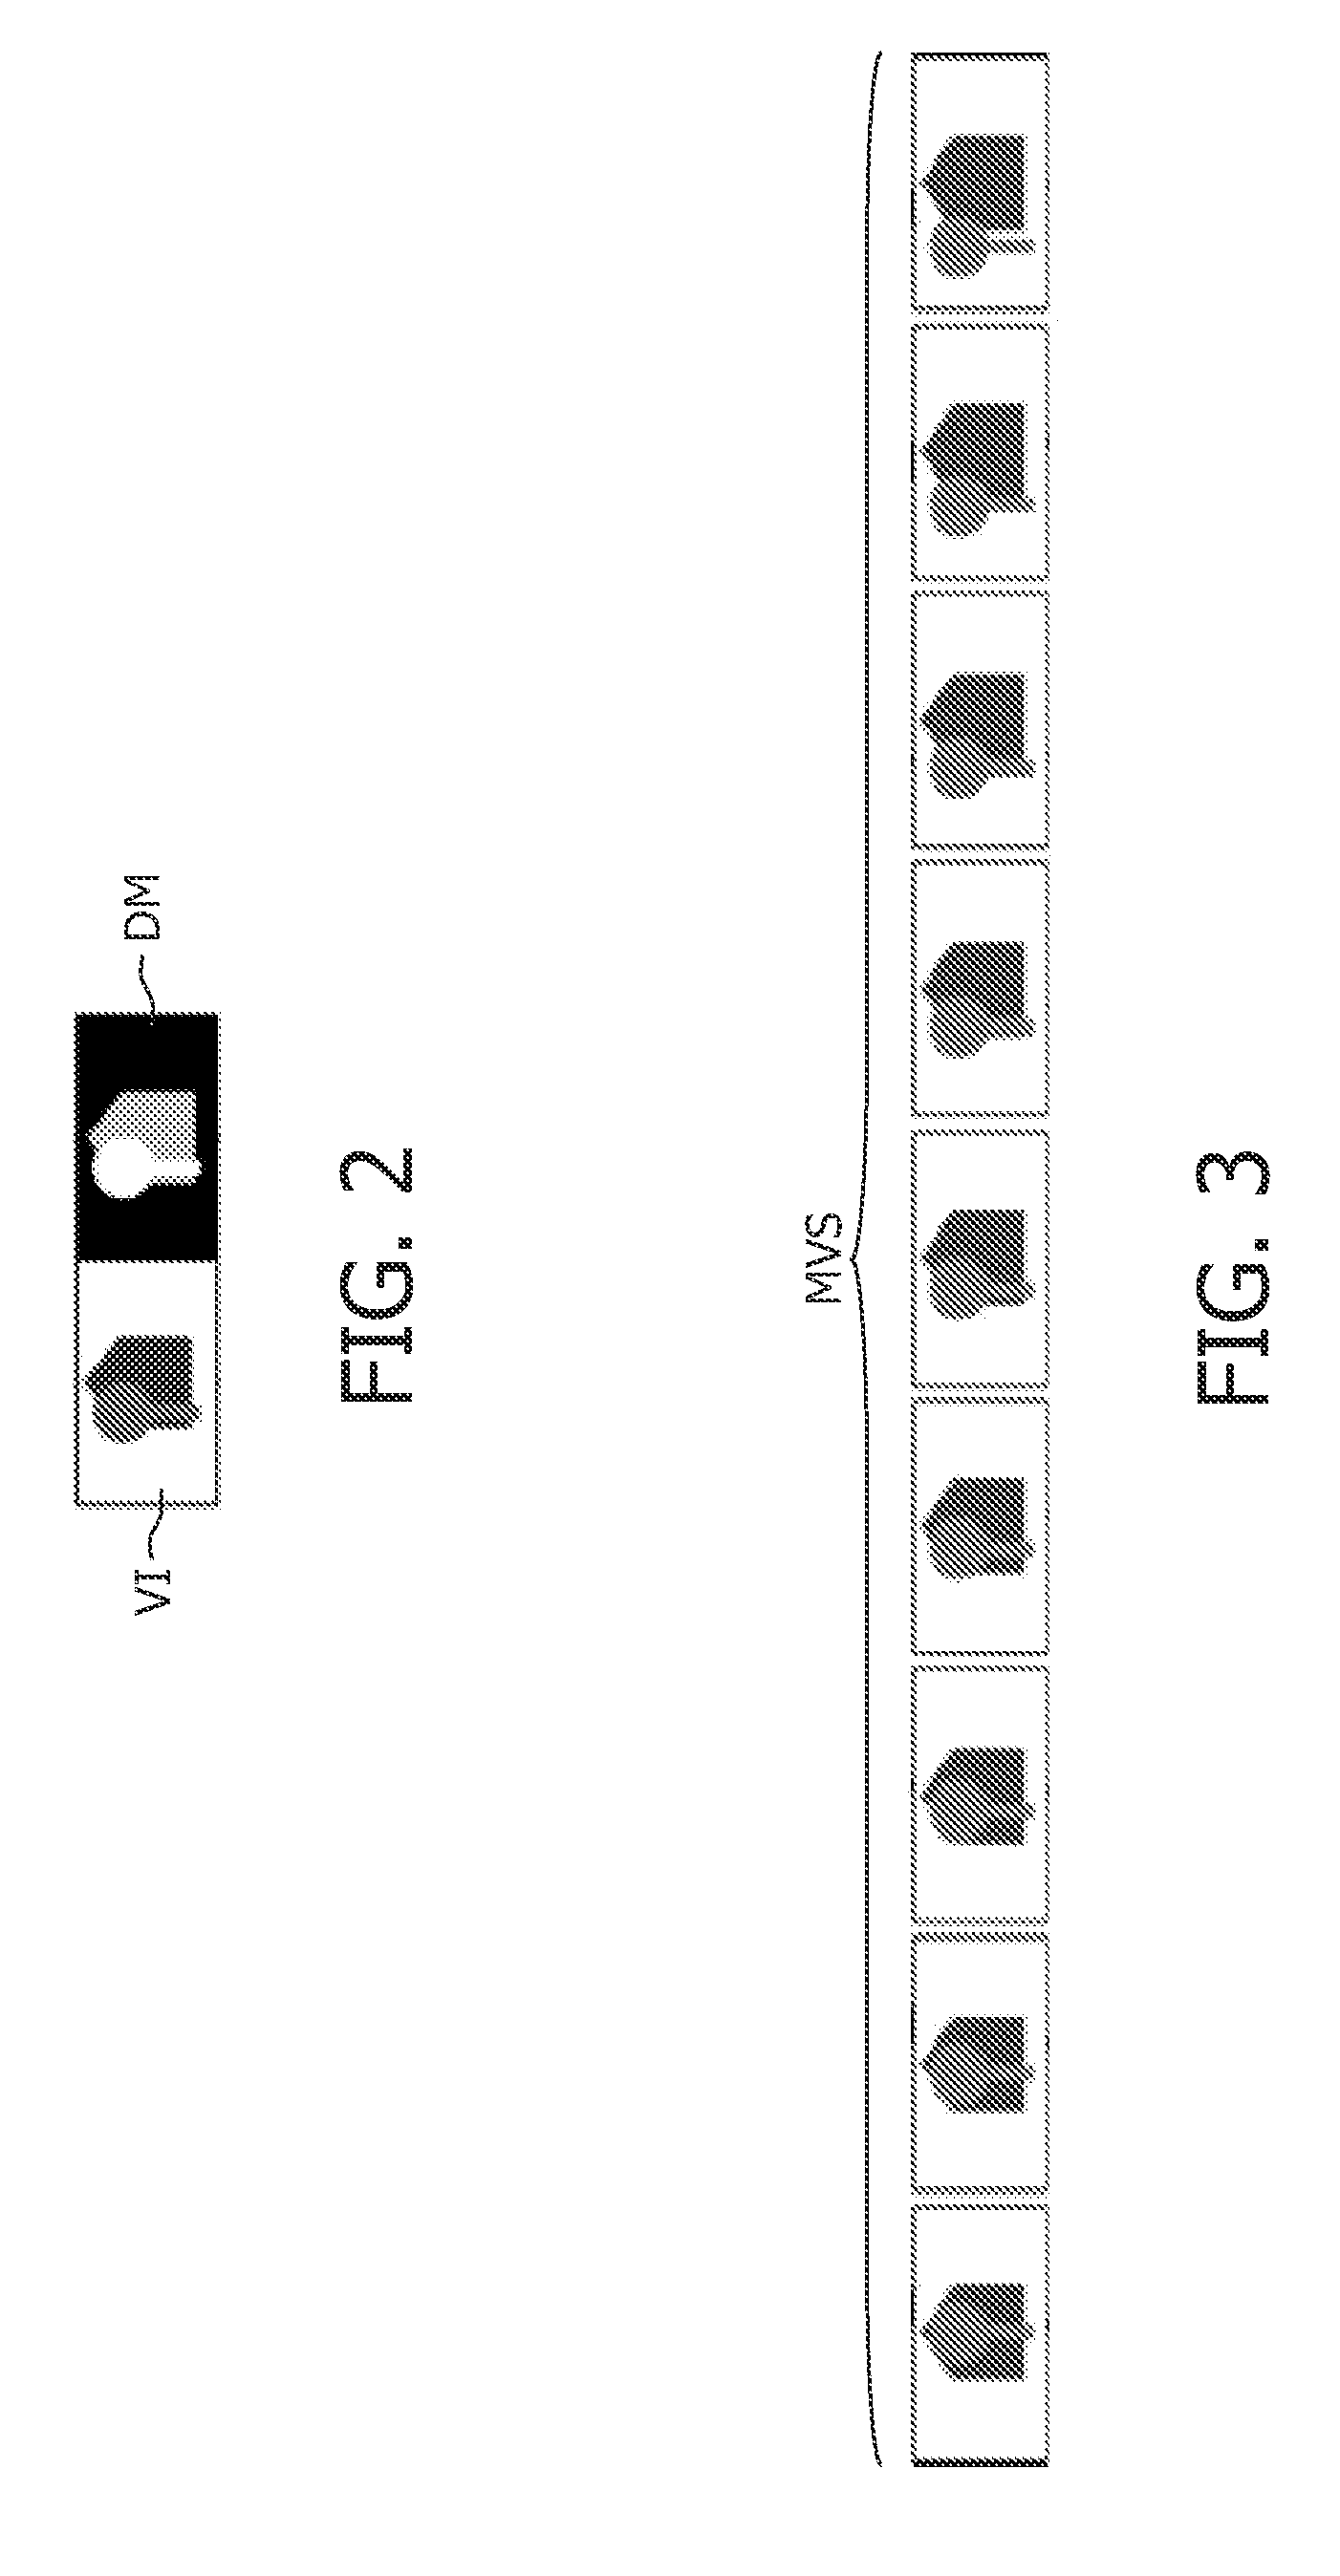 Image processor for overlaying a graphics object